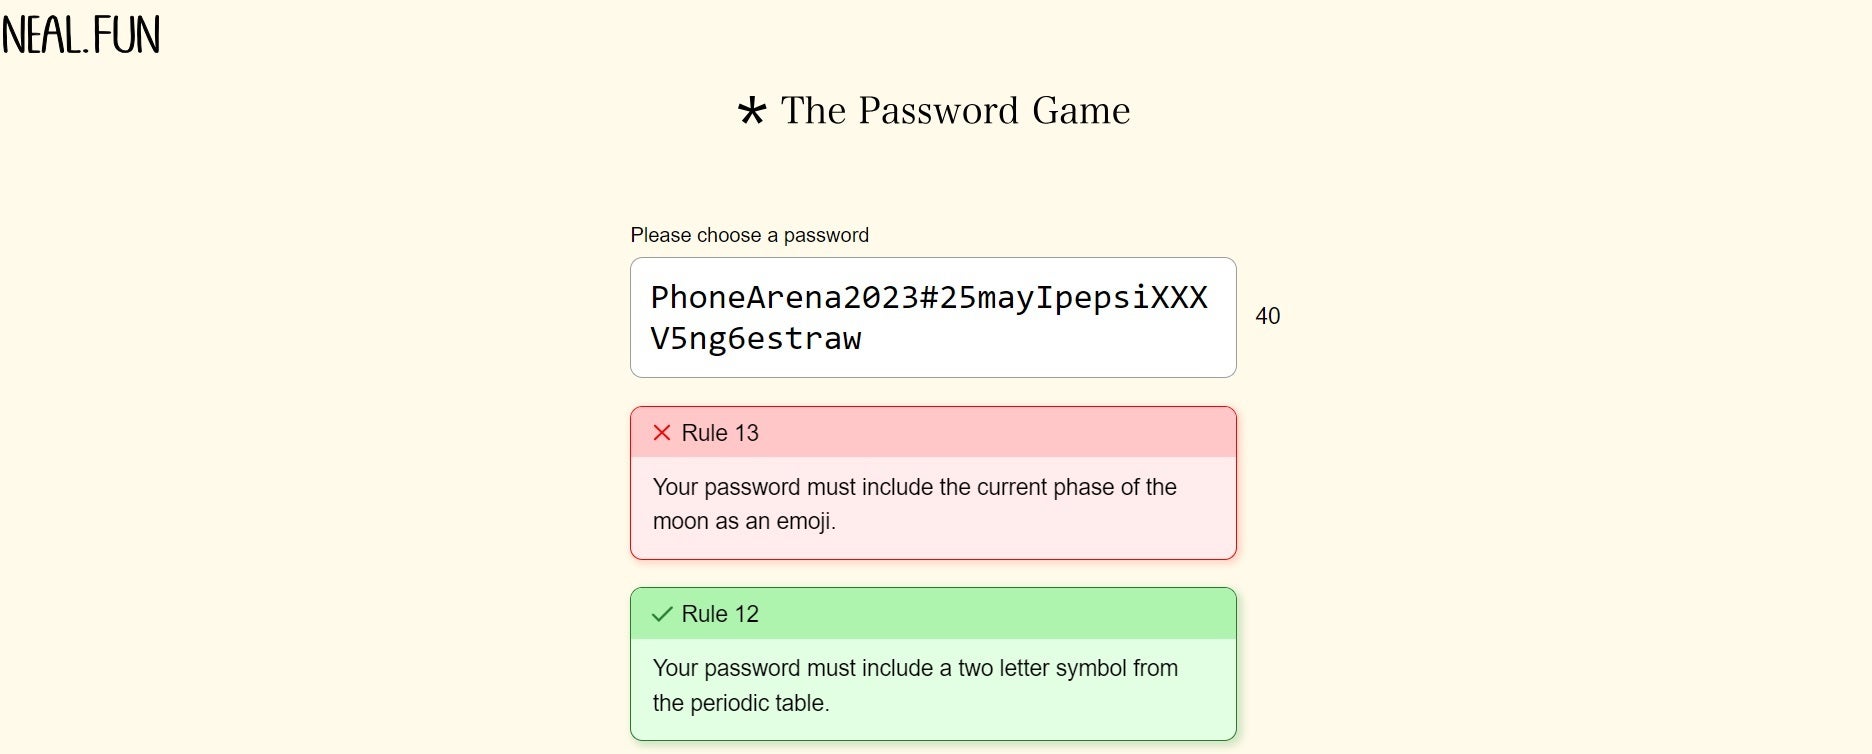 The Password Game: To lose patience is to lose the battle